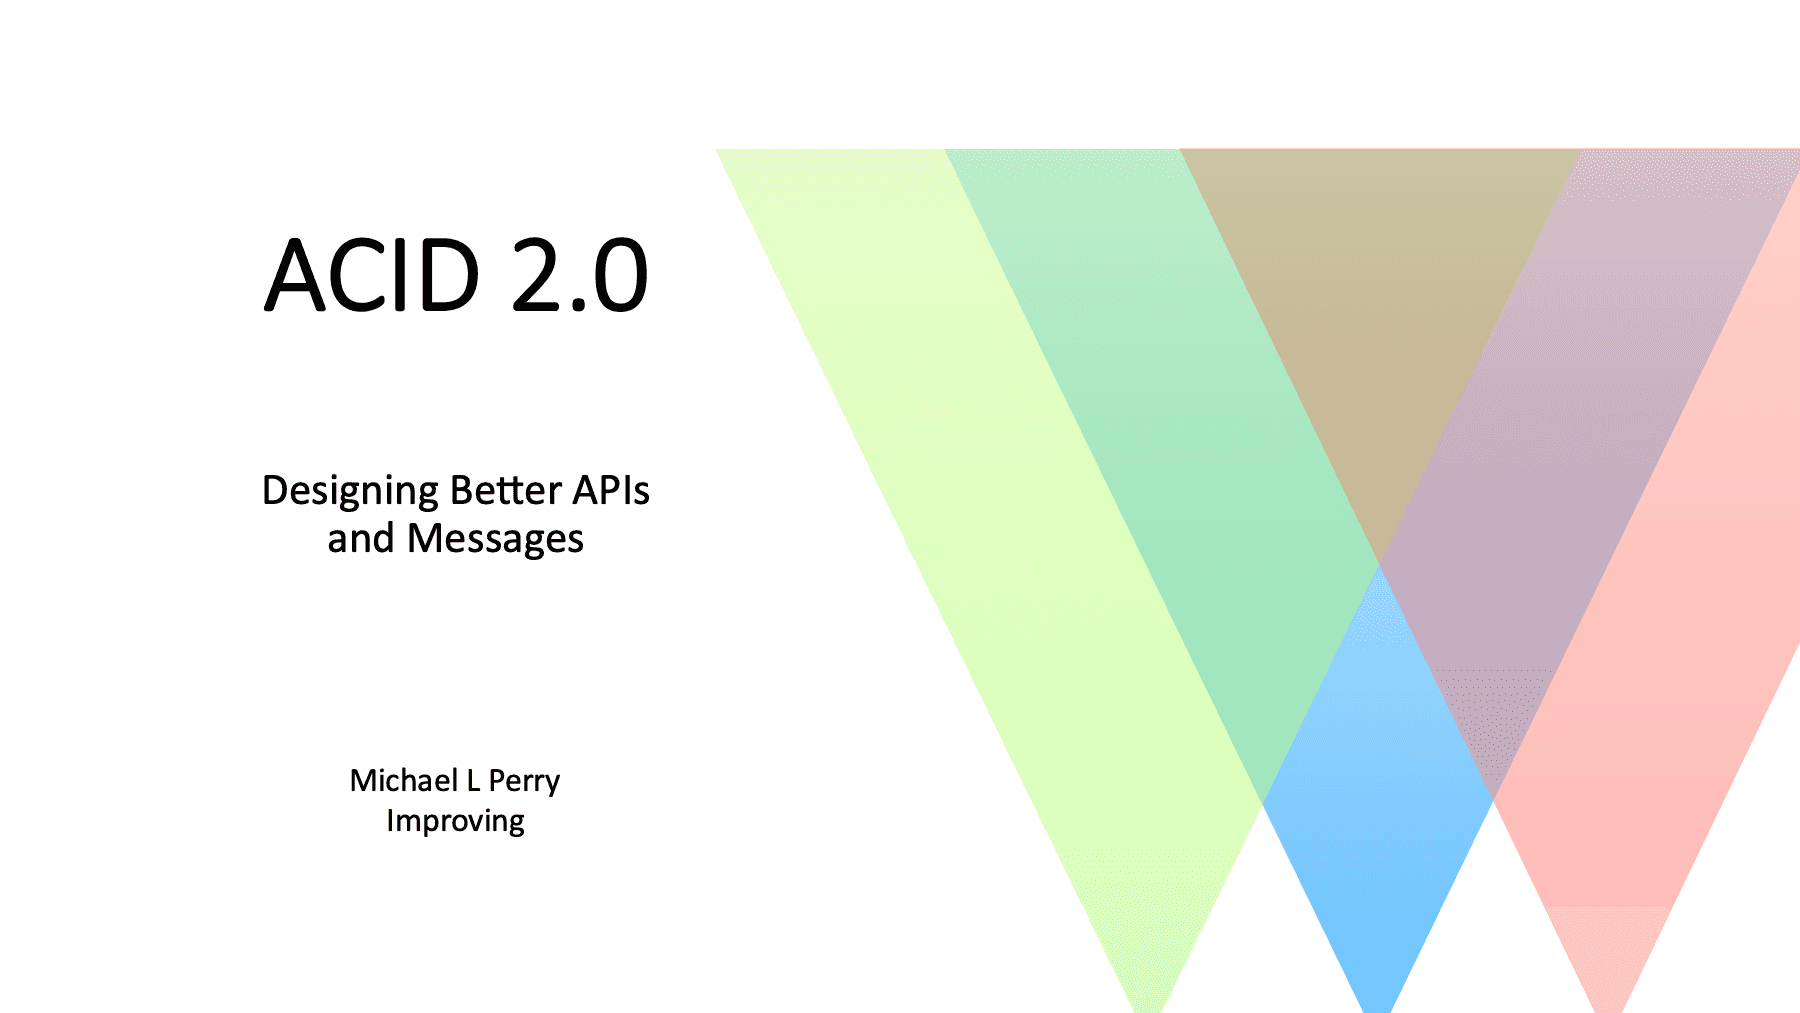 ACID 2.0: Designing Better APIs and Messages